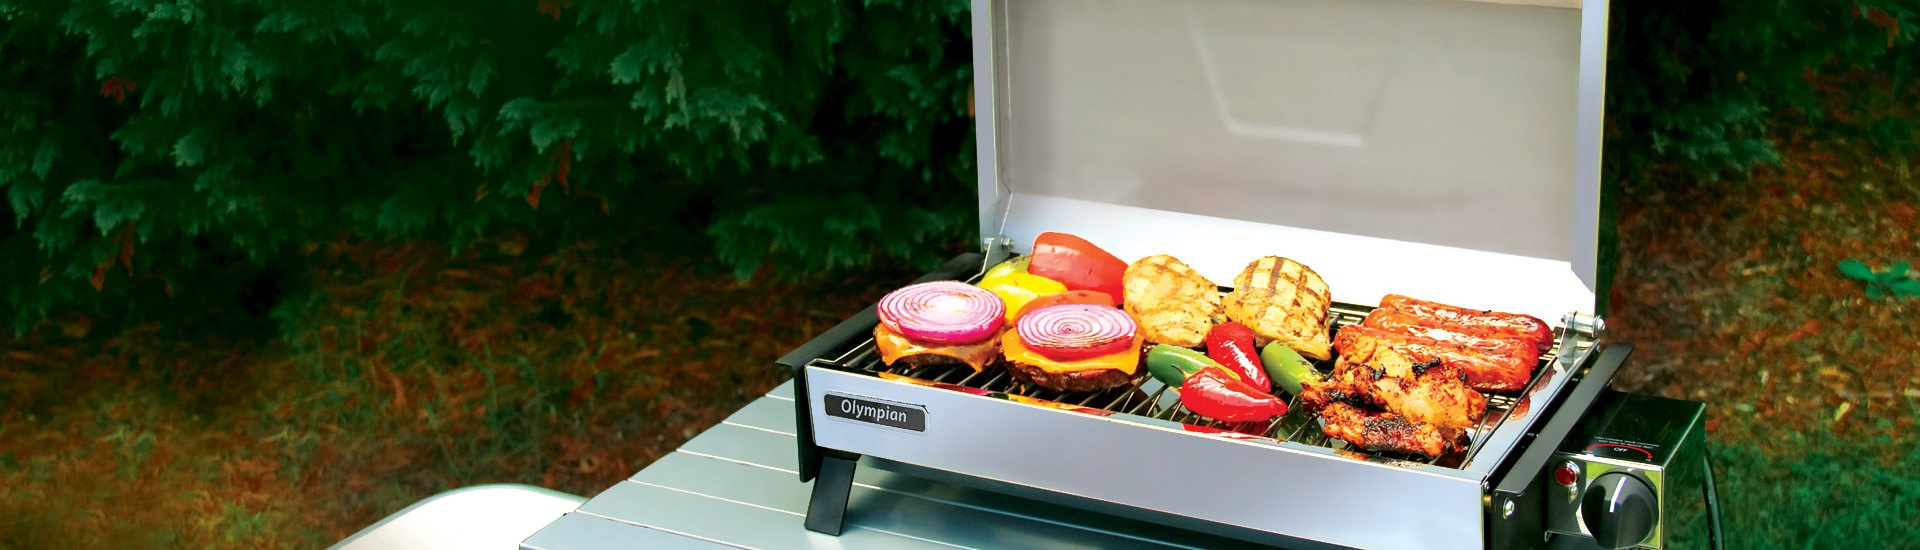 RV Grills | Pick Your Fuel, Your Size, And Your Mount, And Start Grilling!